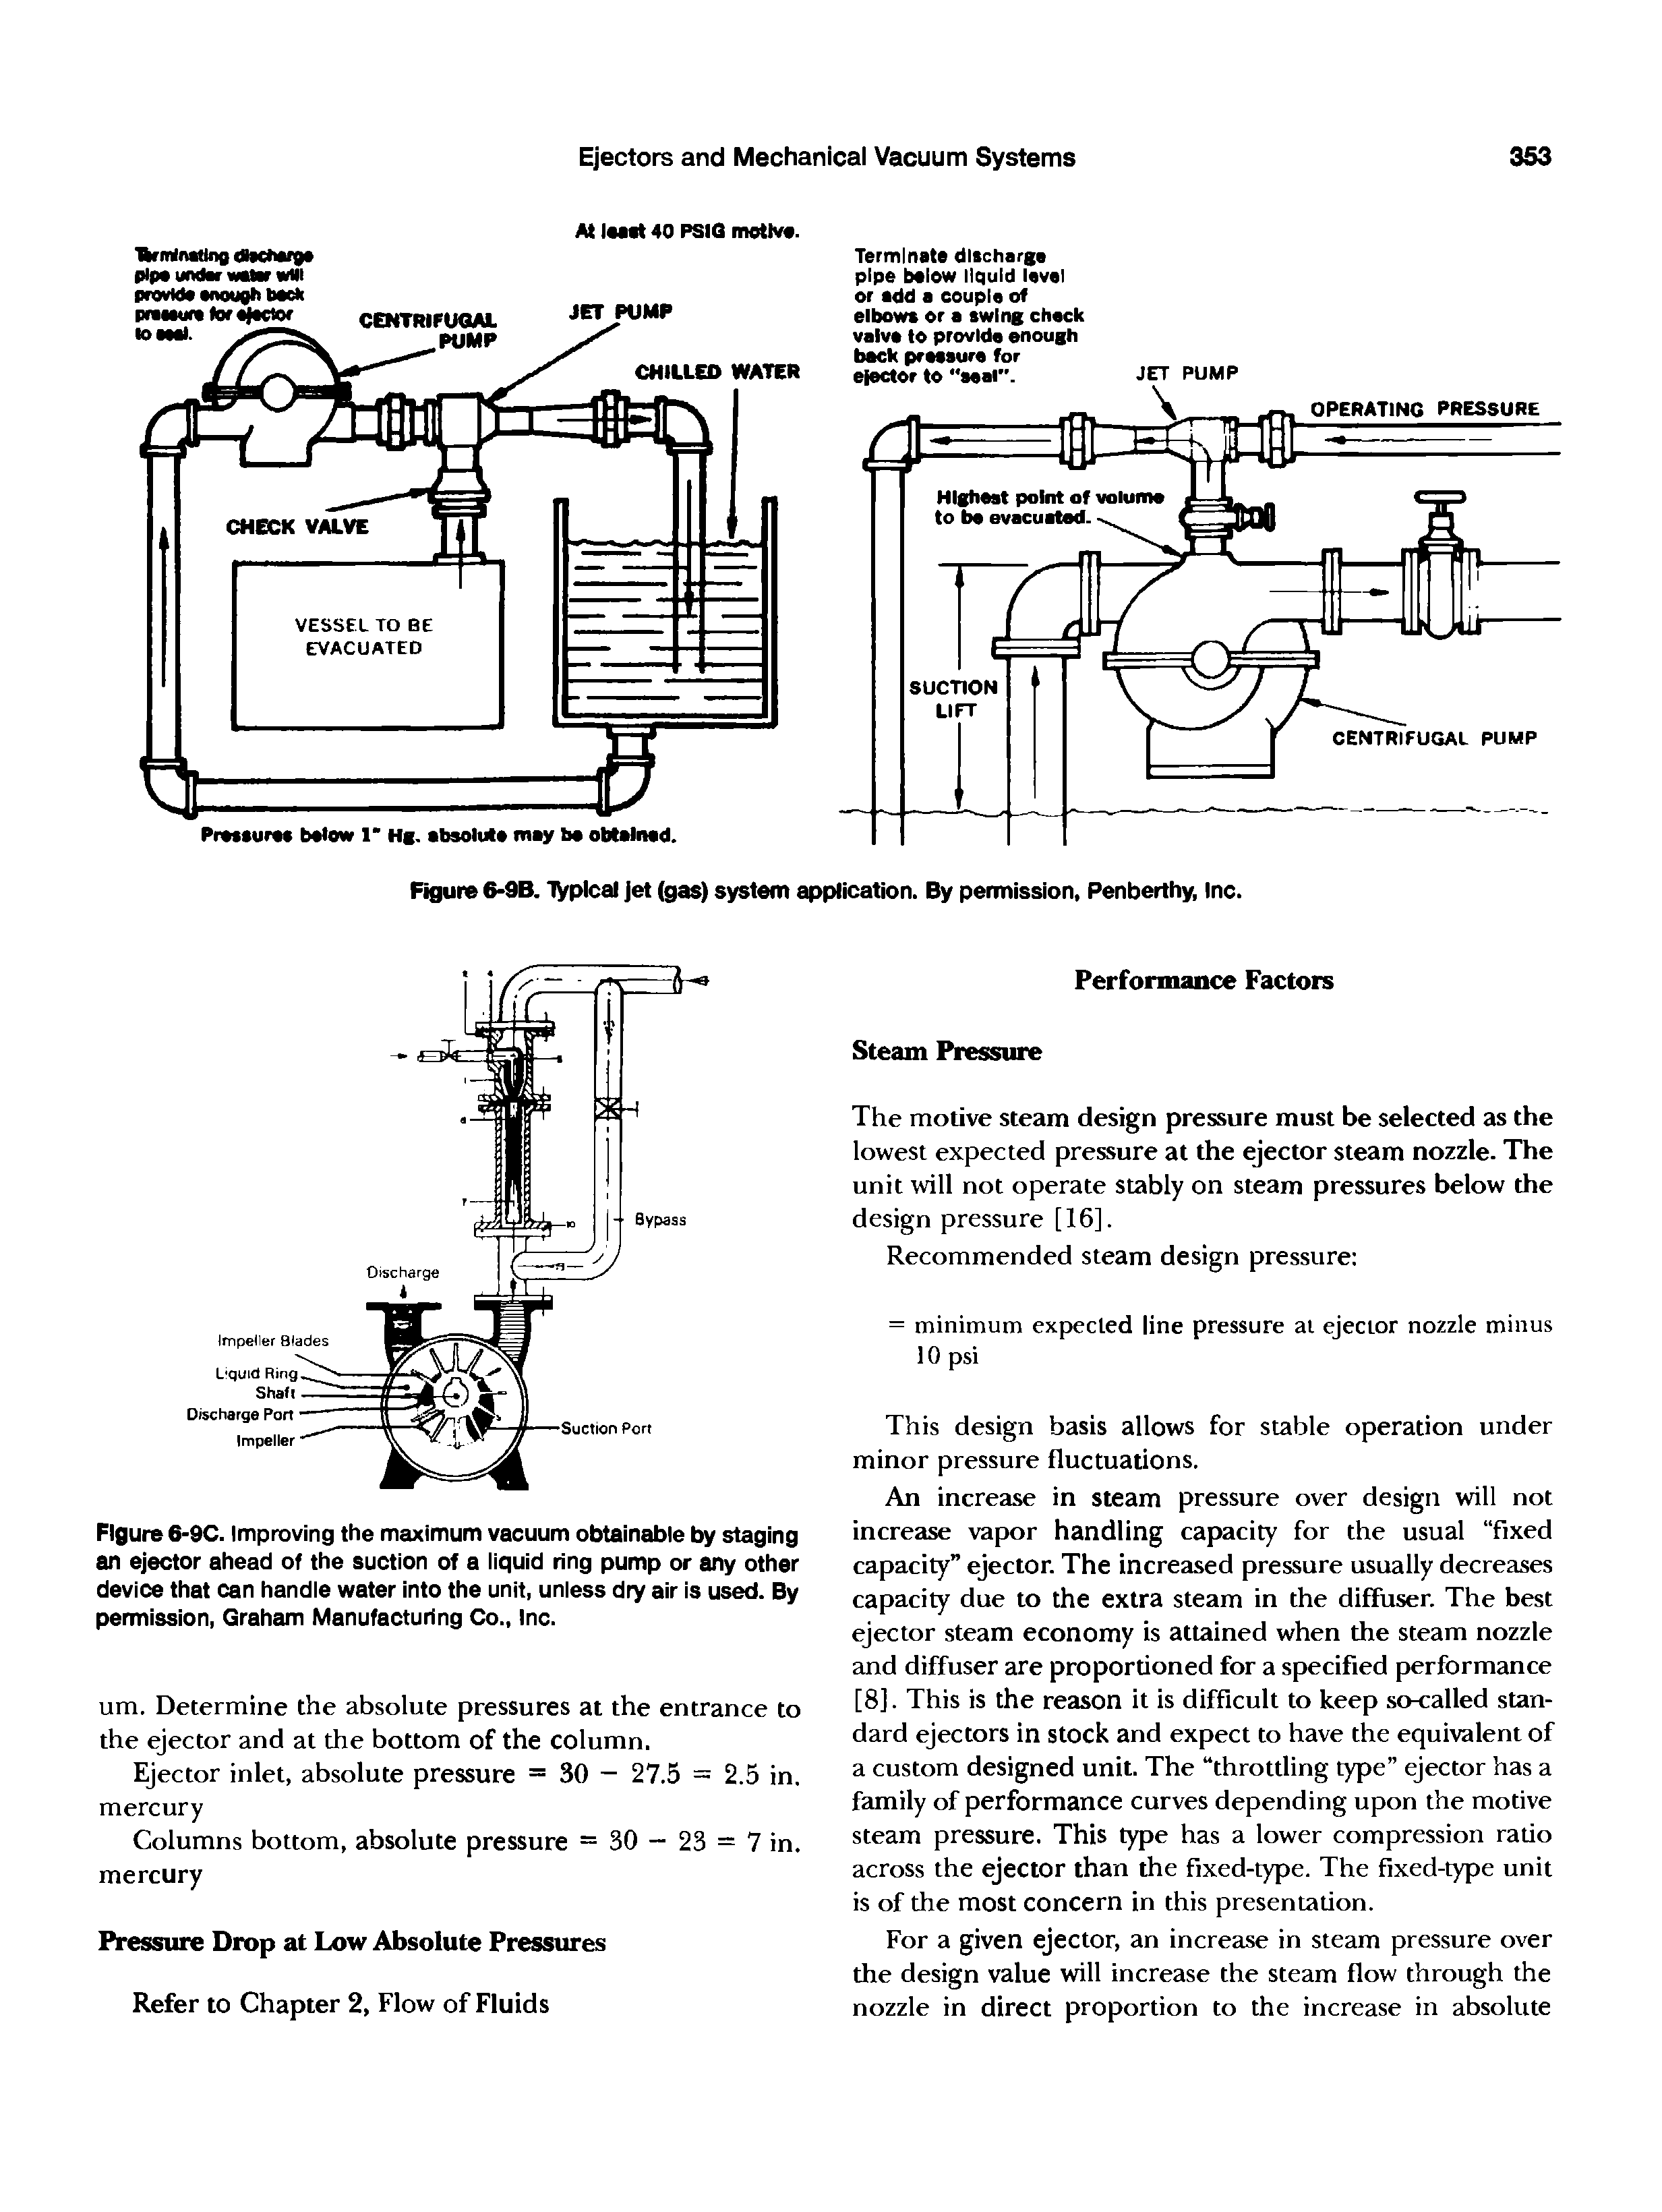 Figure 6-9C. Improving the maximum vacuum obtainable by staging an ejector ahead of the suction of a liquid ring pump or any other device that can handle water into the unit, unless dry air is used. By permission, Graham Manufacturing Co., Inc.